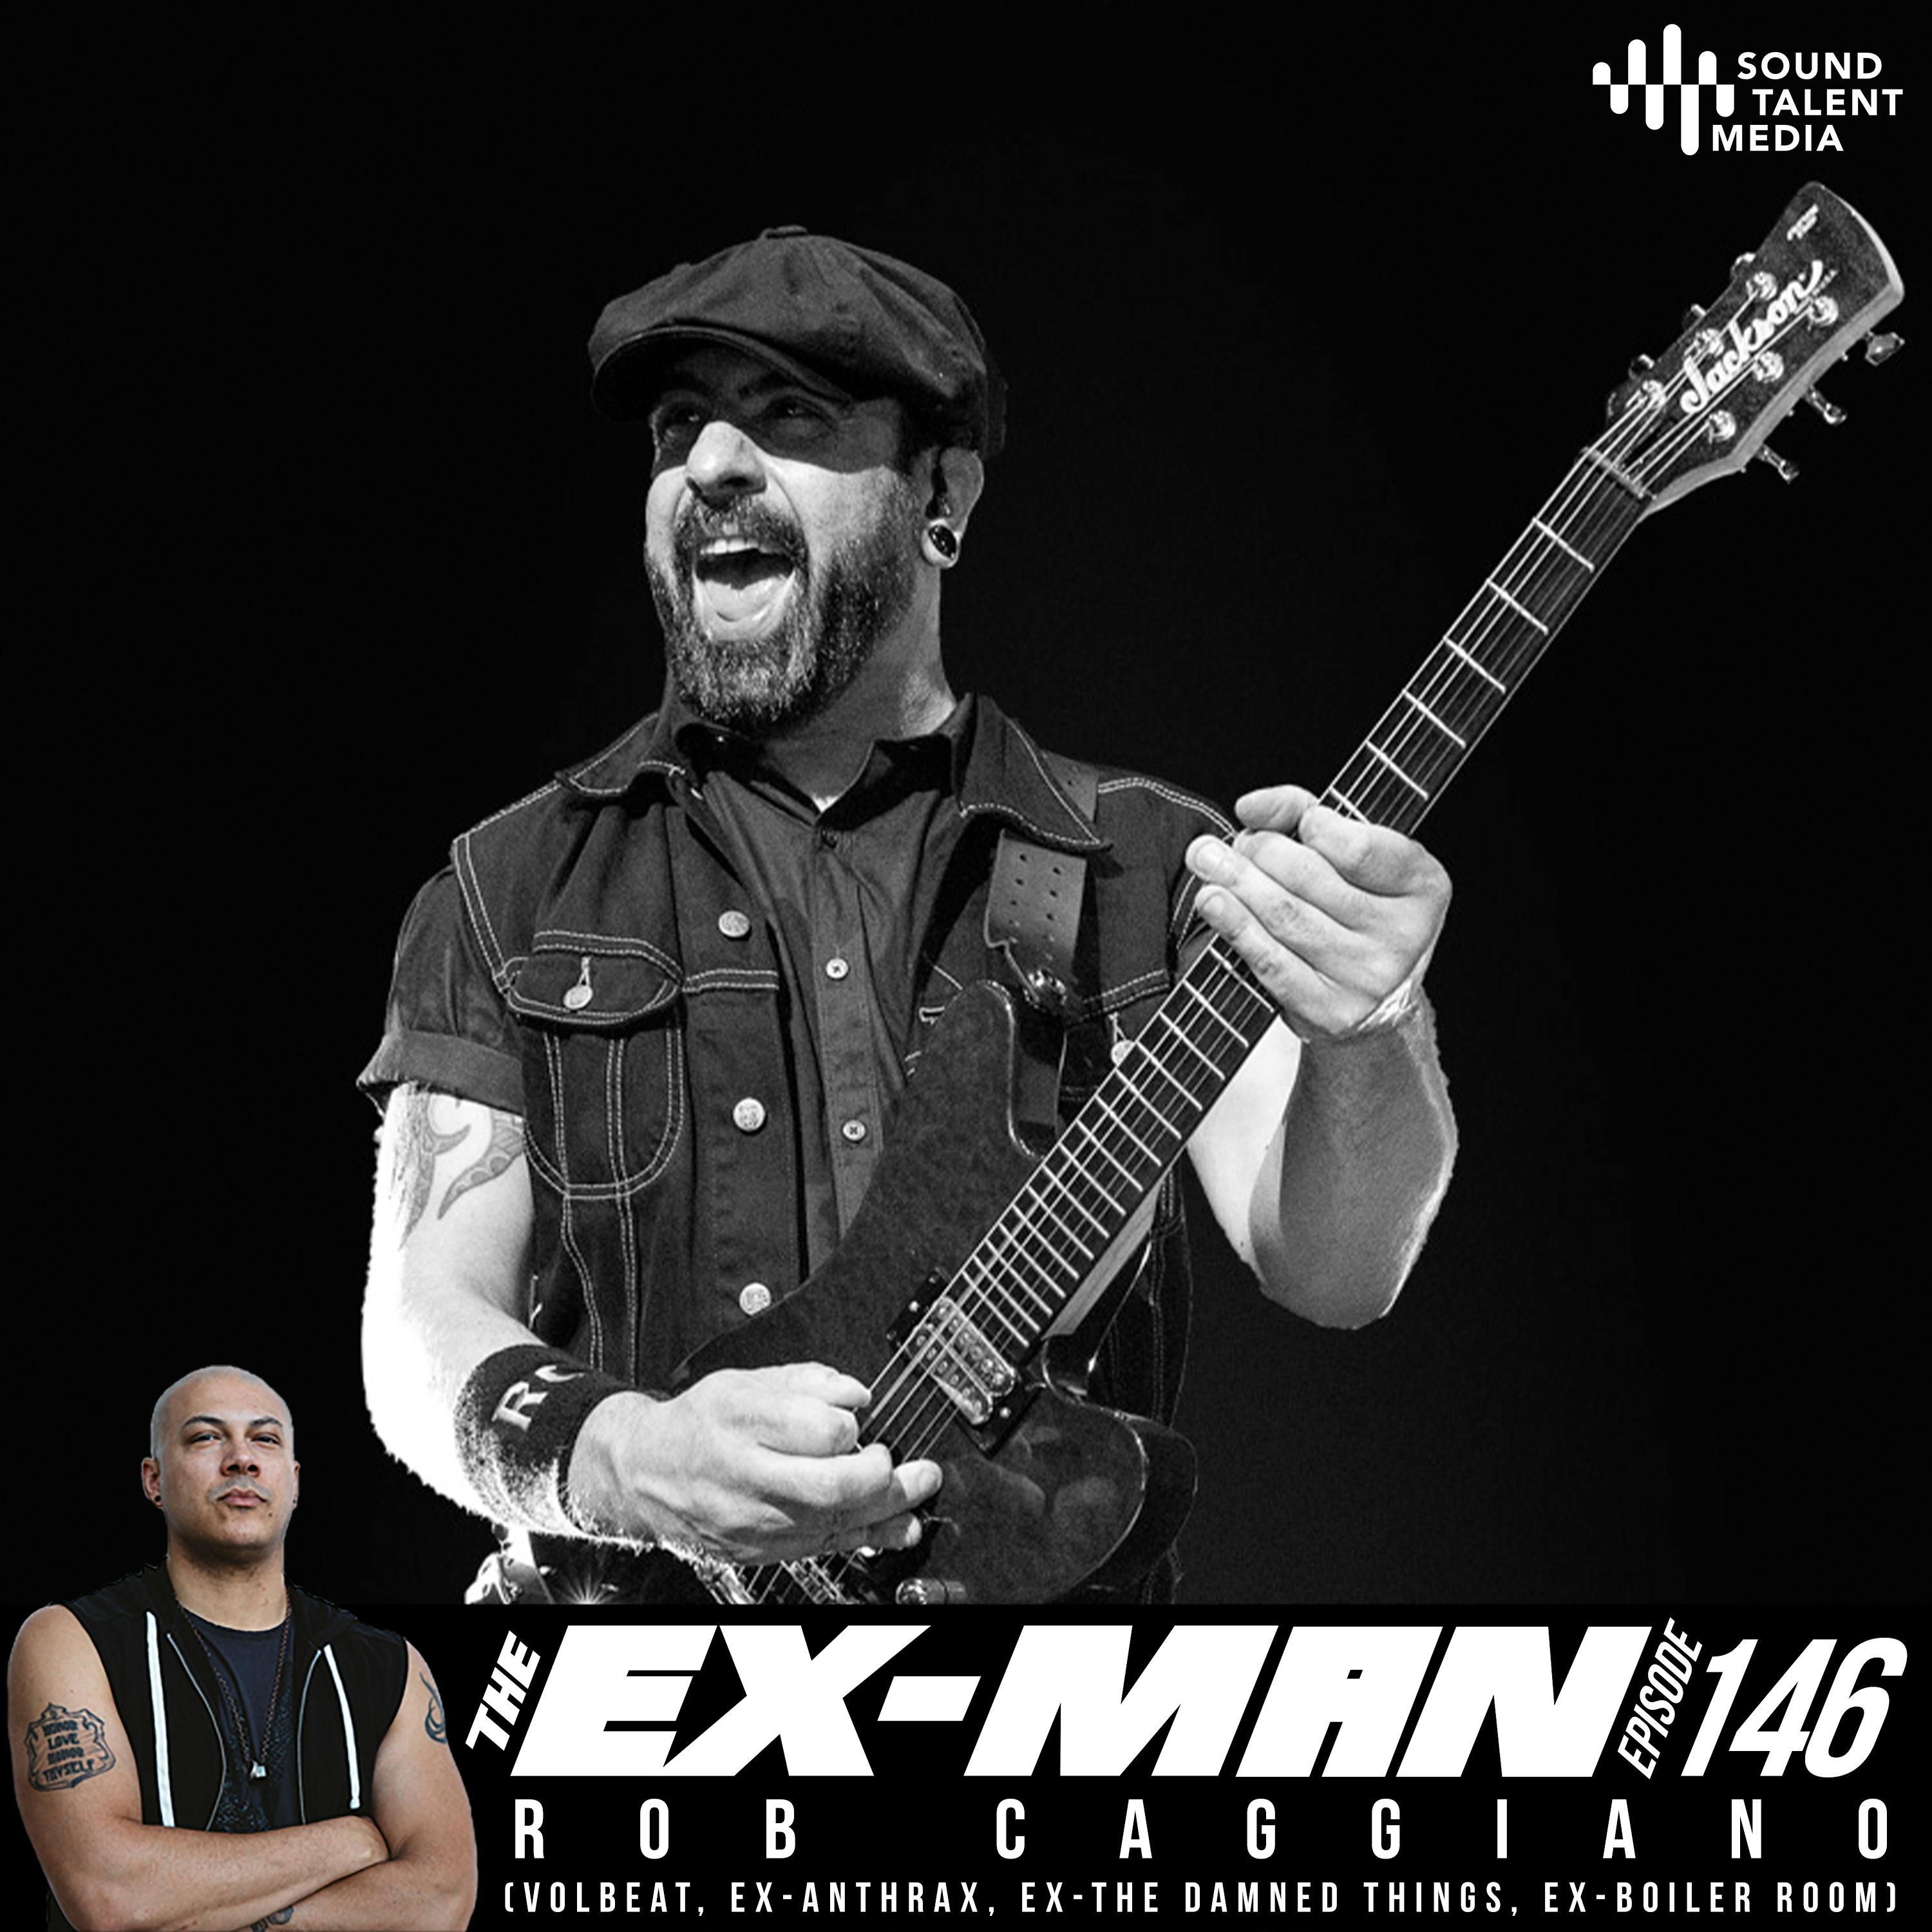 Rob Caggiano (Volbeat, ex-Anthrax, ex-The Damned Things, ex-Boiler Room)